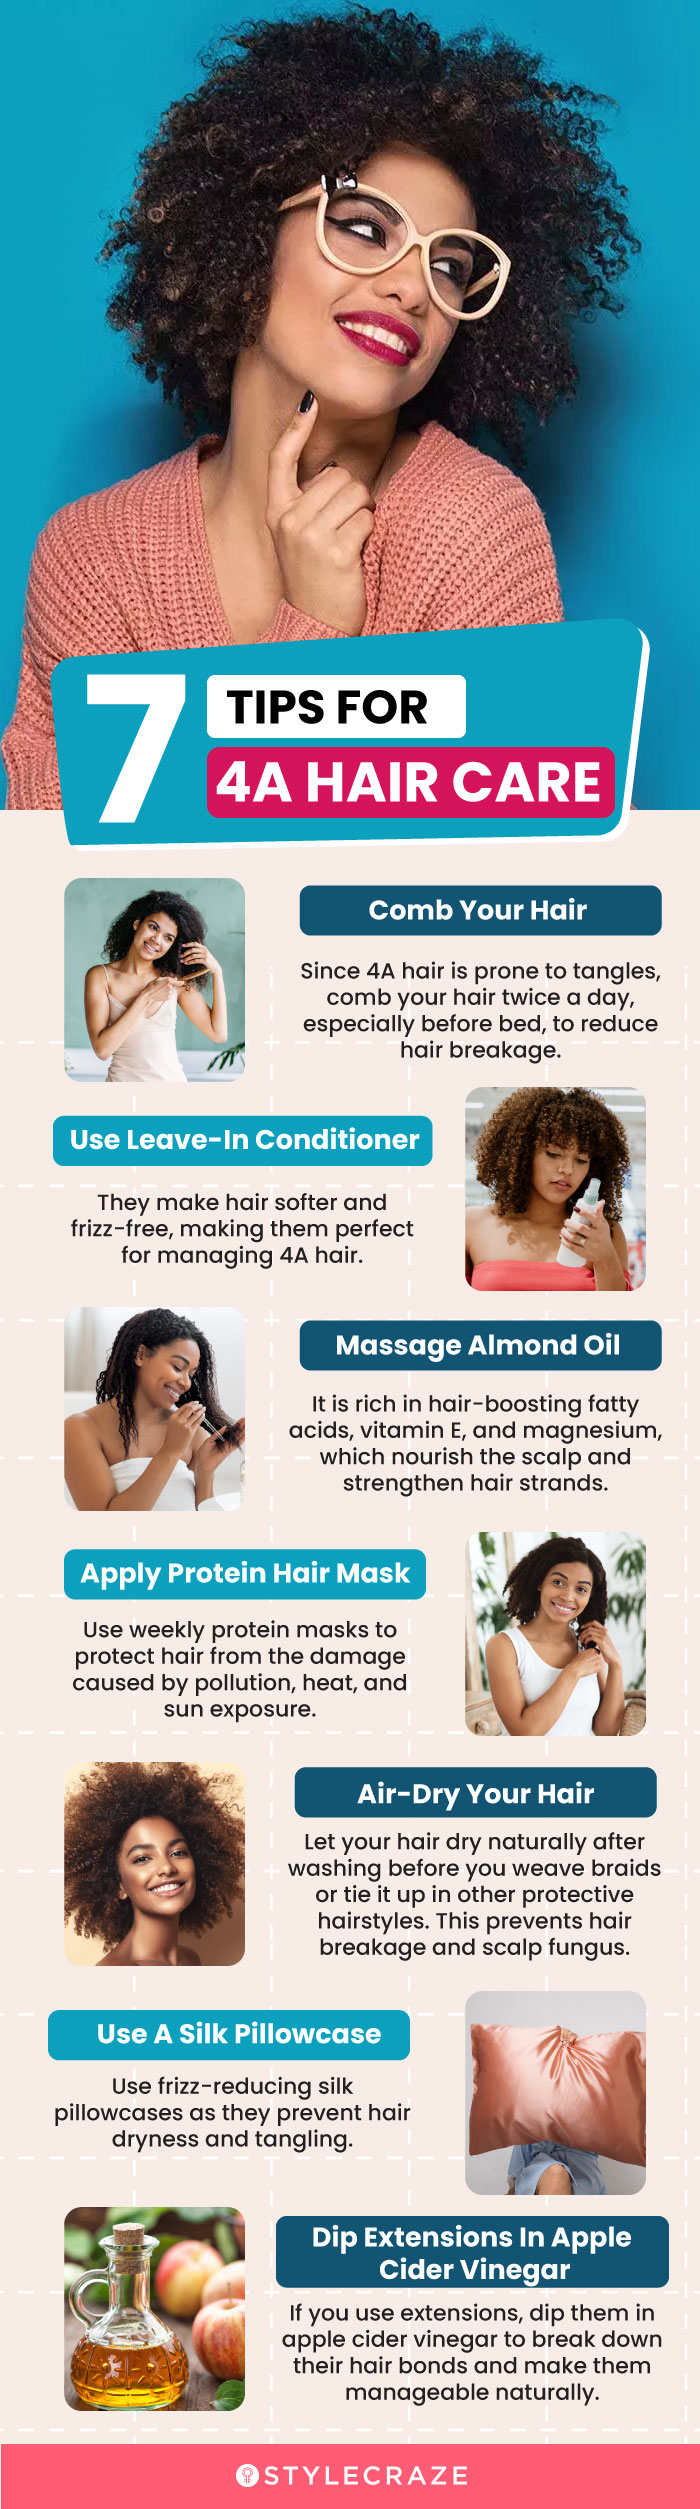 7 tips for 4a hair care (infographic)